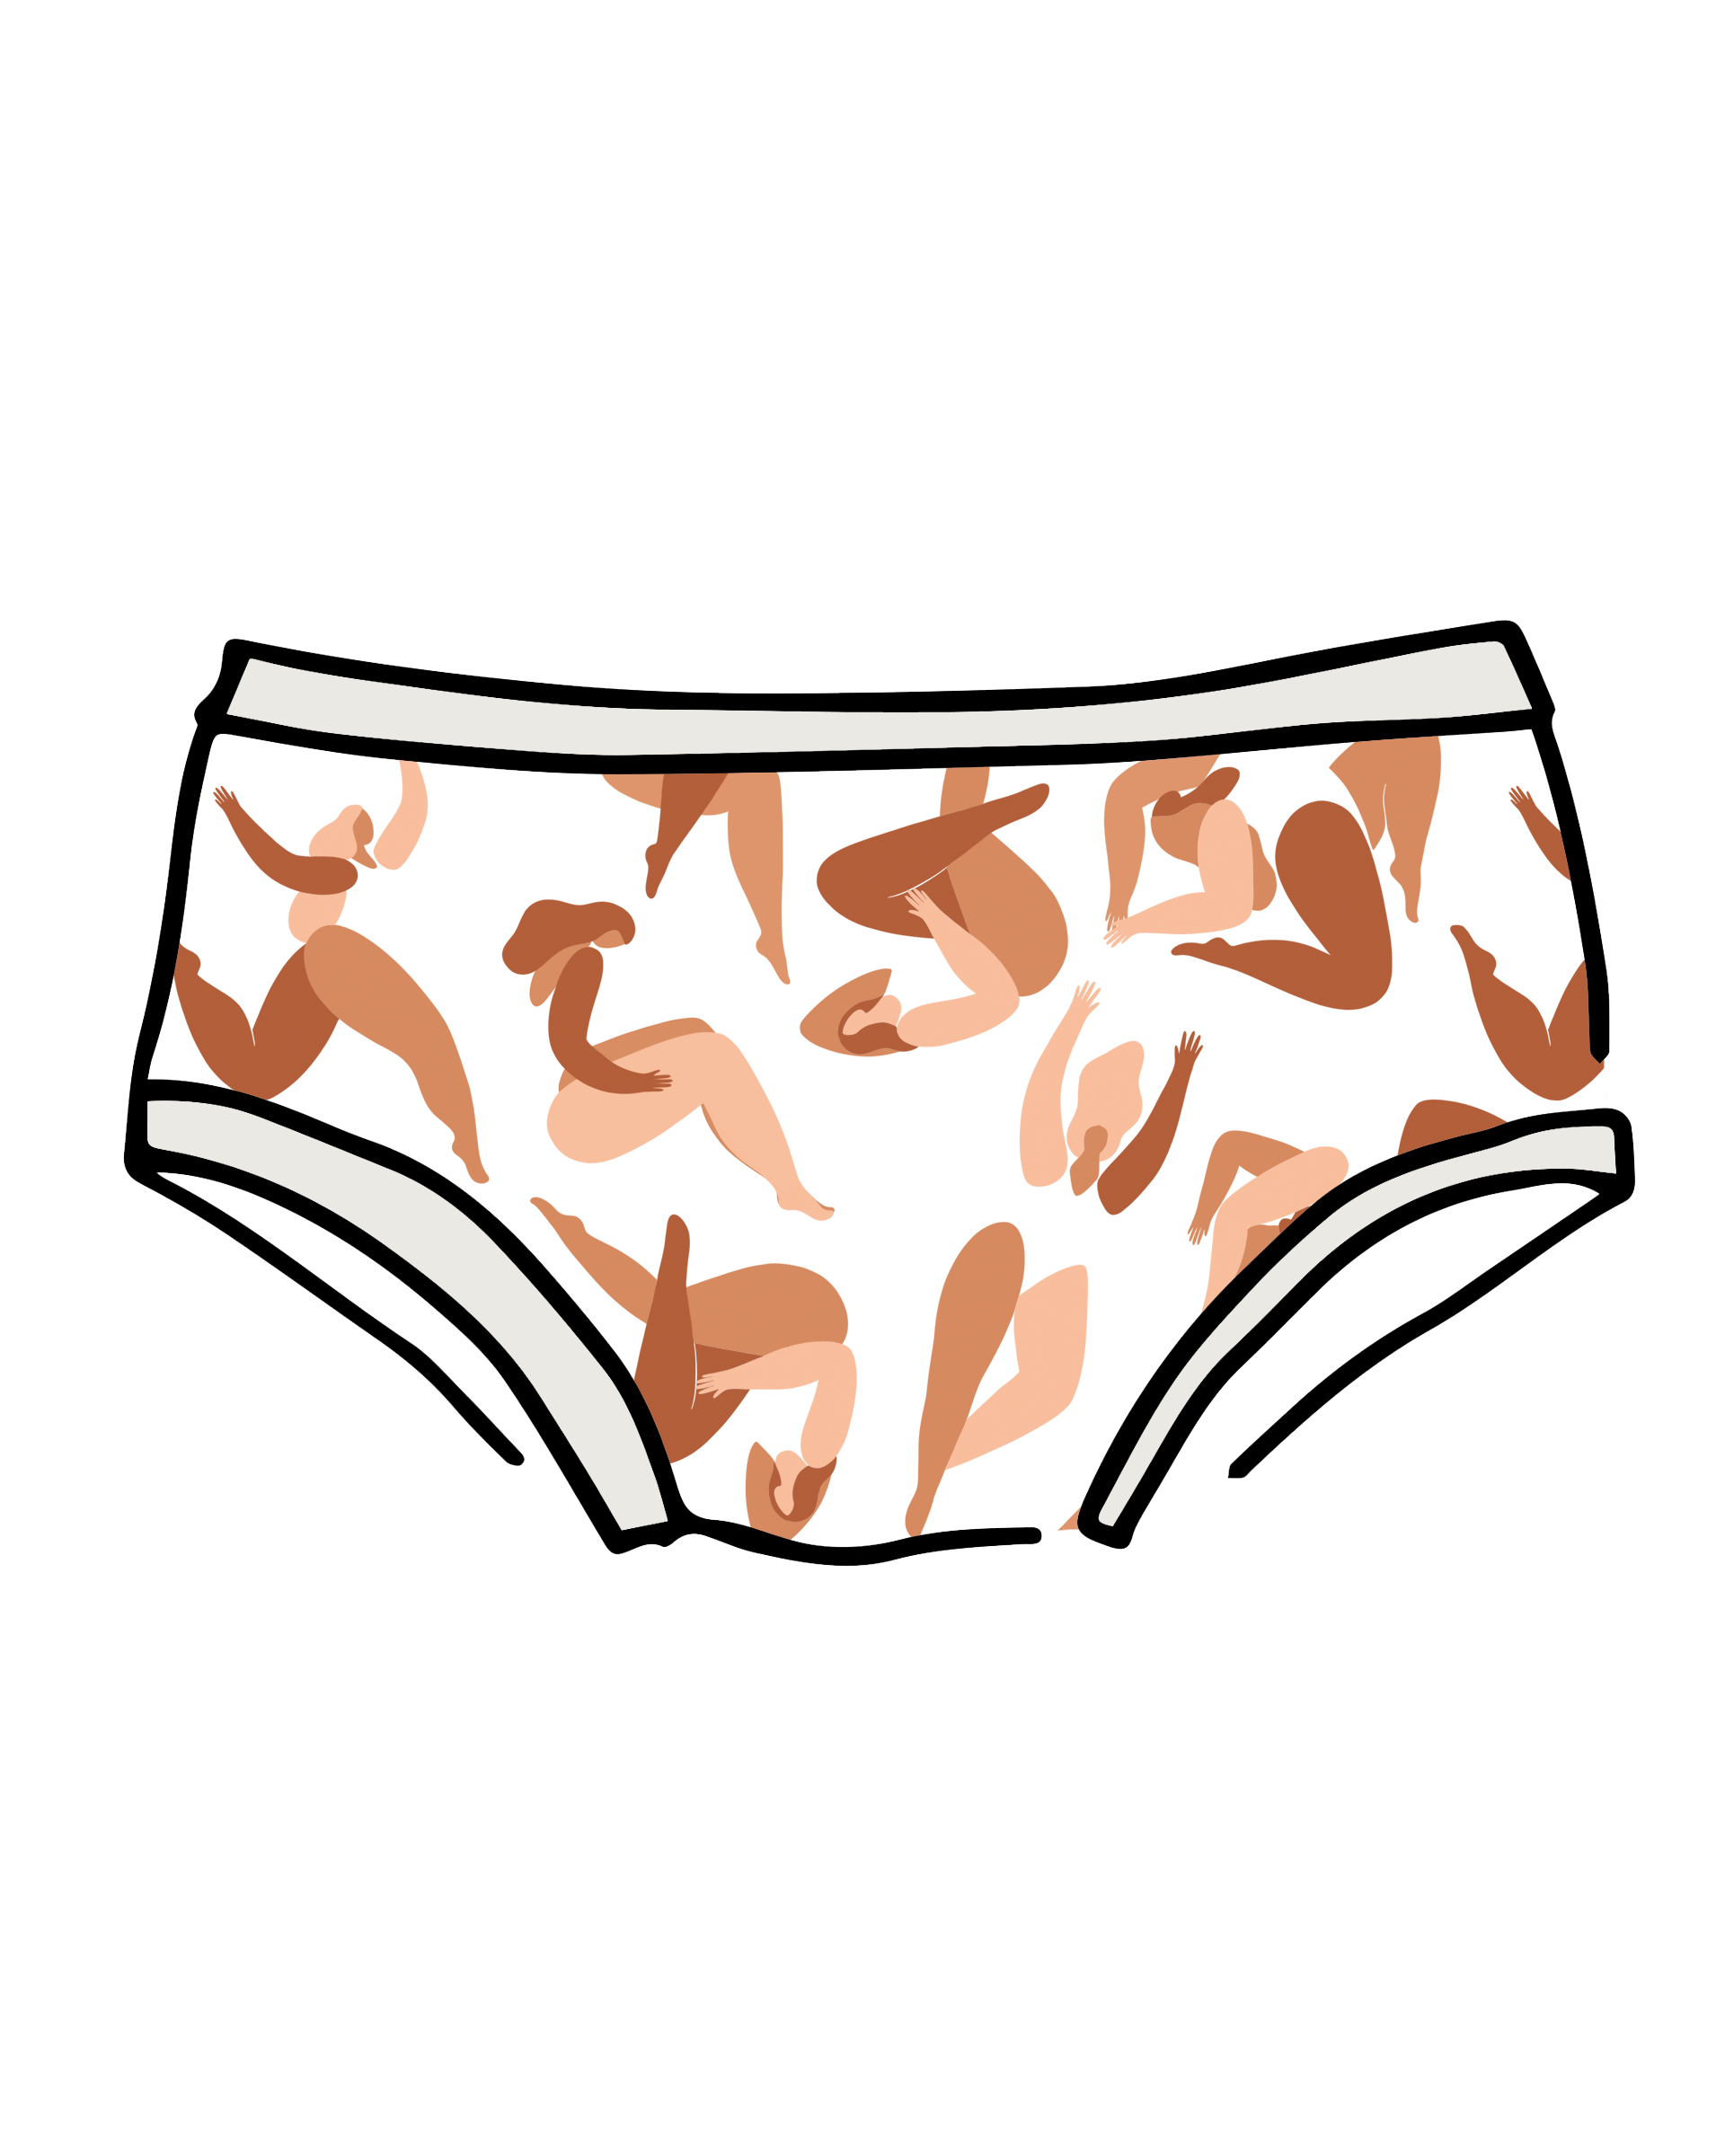 Drawing of Thunderpants Hipster style underwear in Bodies in Motion print.